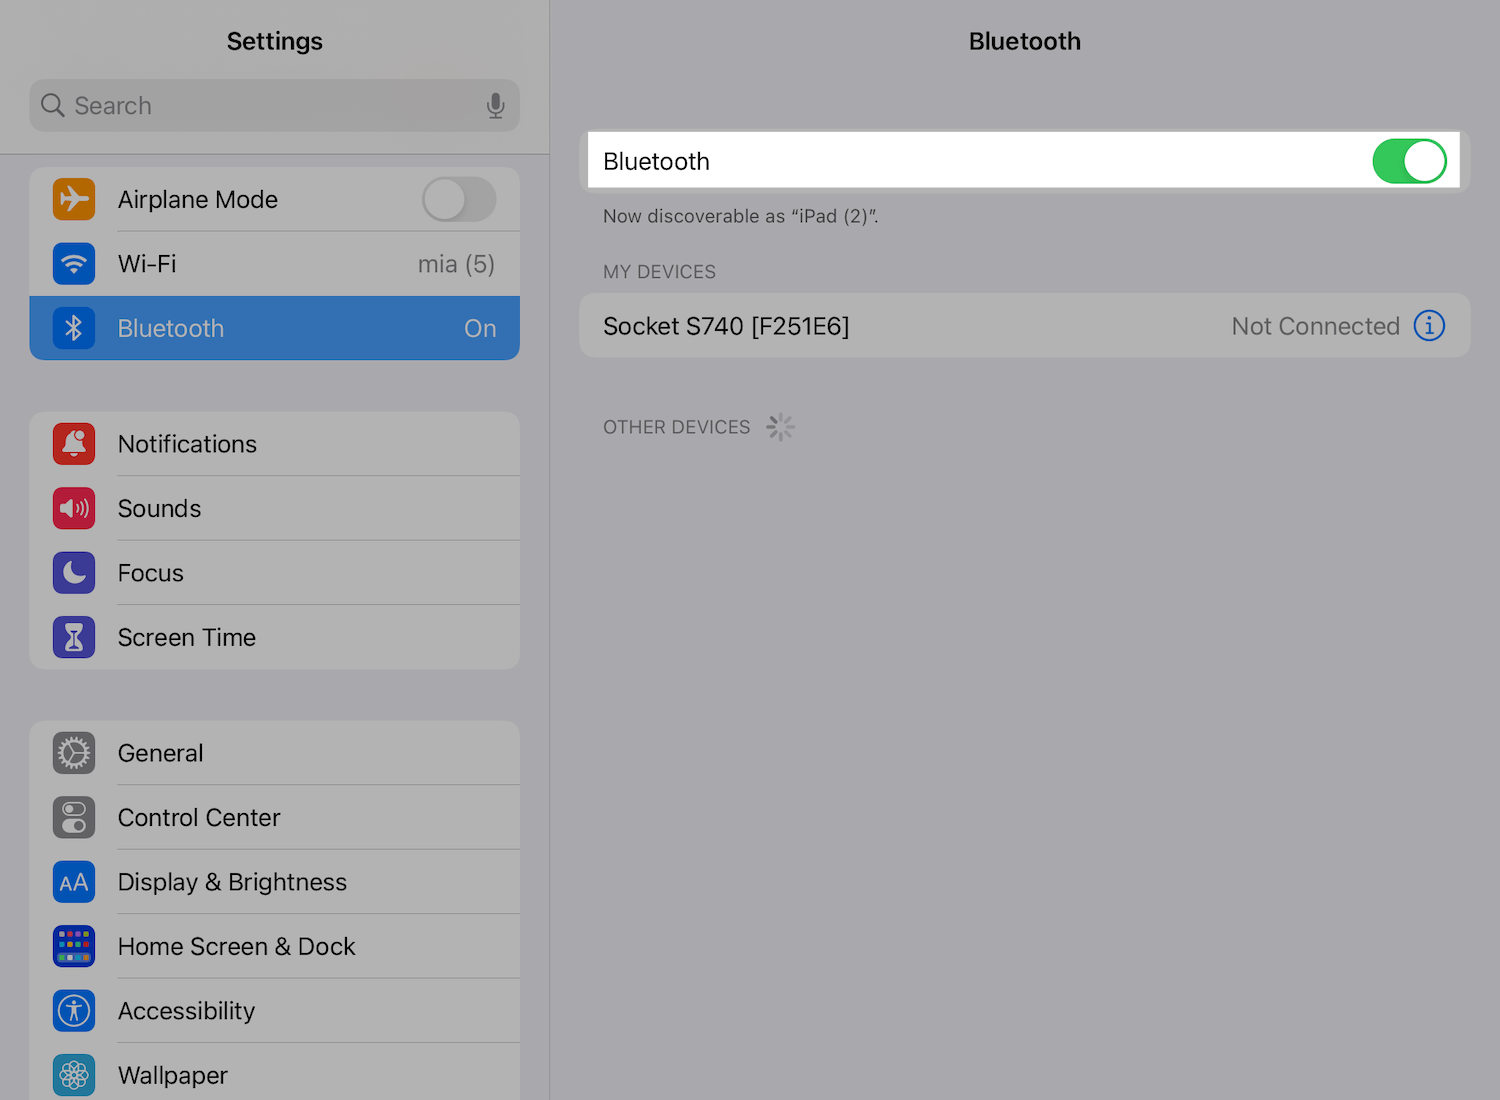 The 'Bluetooth' setting toggled on within the iPad's Settings app.